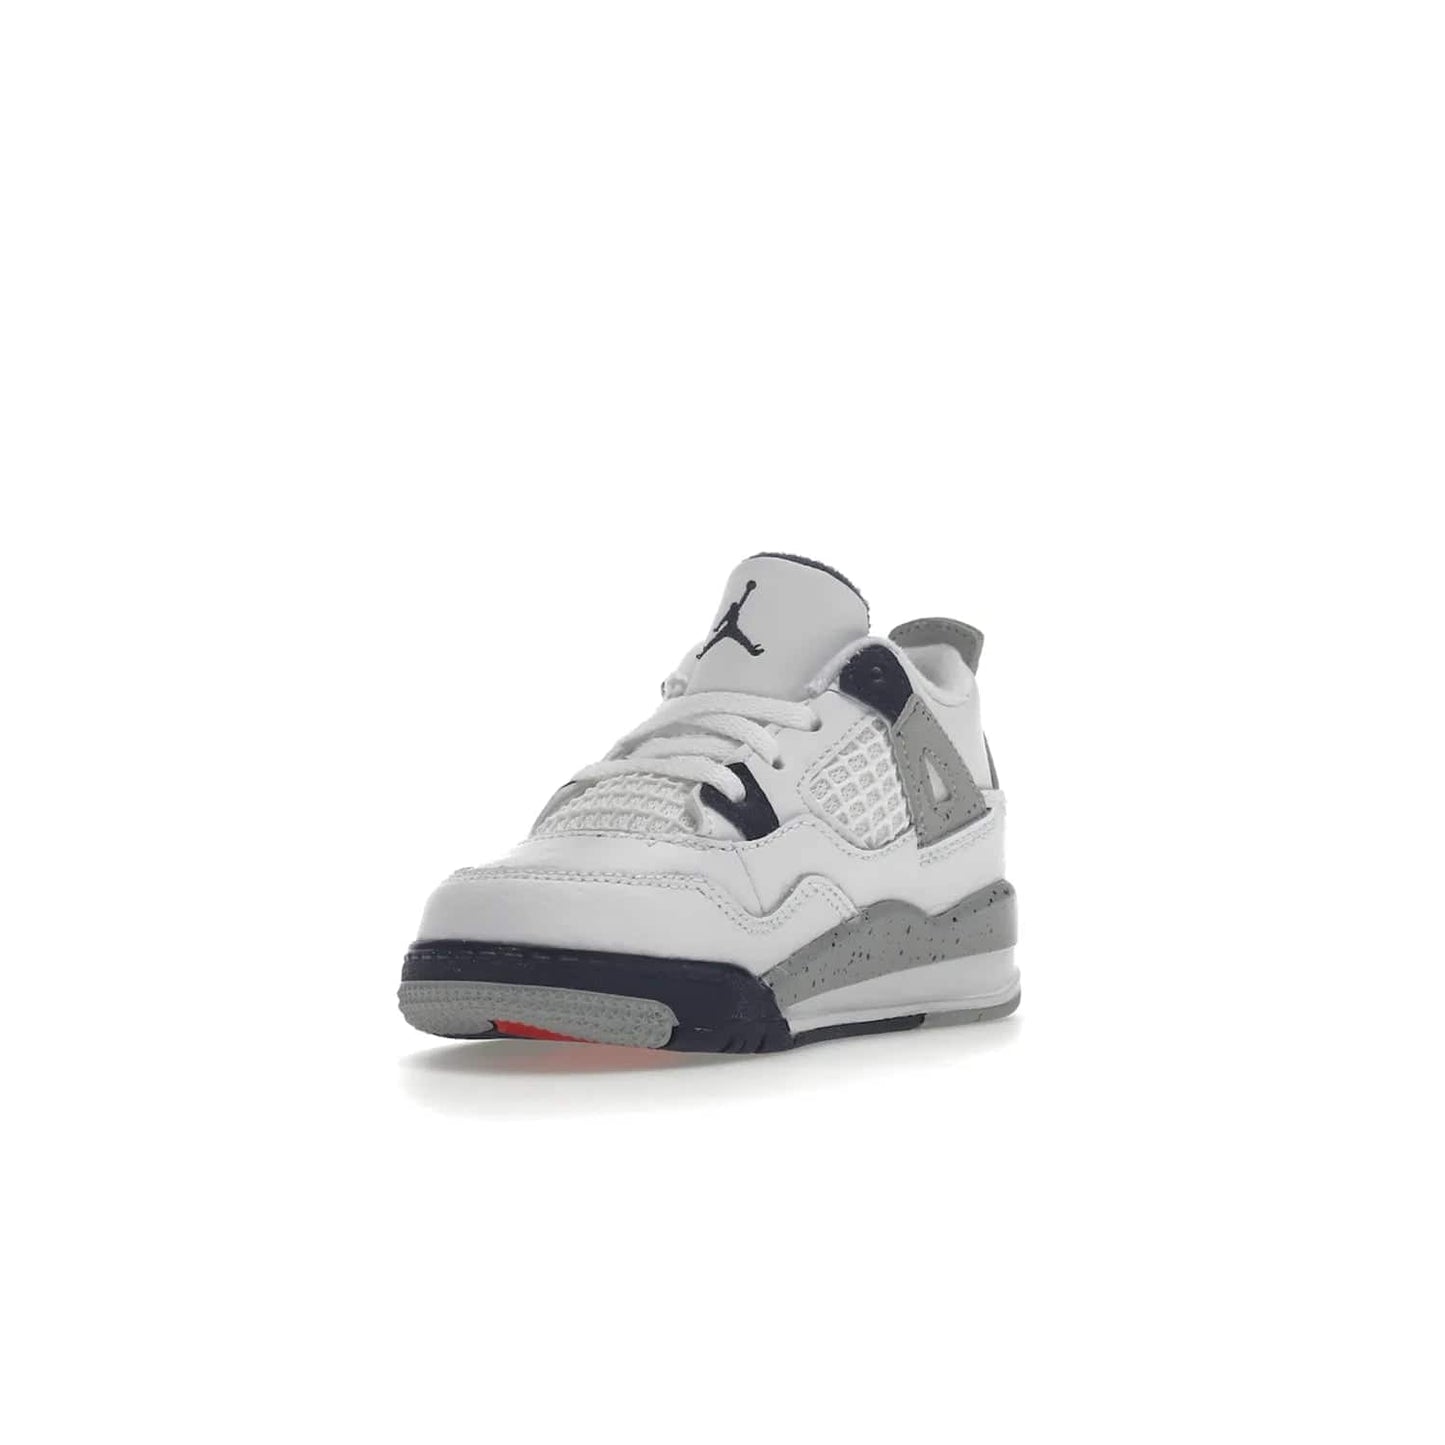 Jordan 4 Retro Midnight Navy (TD) - Image 14 - Only at www.BallersClubKickz.com - Introducing the Jordan 4 Retro Midnight Navy (TD) for kids. White leather upper with navy and grey accents plus fire red detailing. Perfect for everyday wear. Get yours before they sell out.